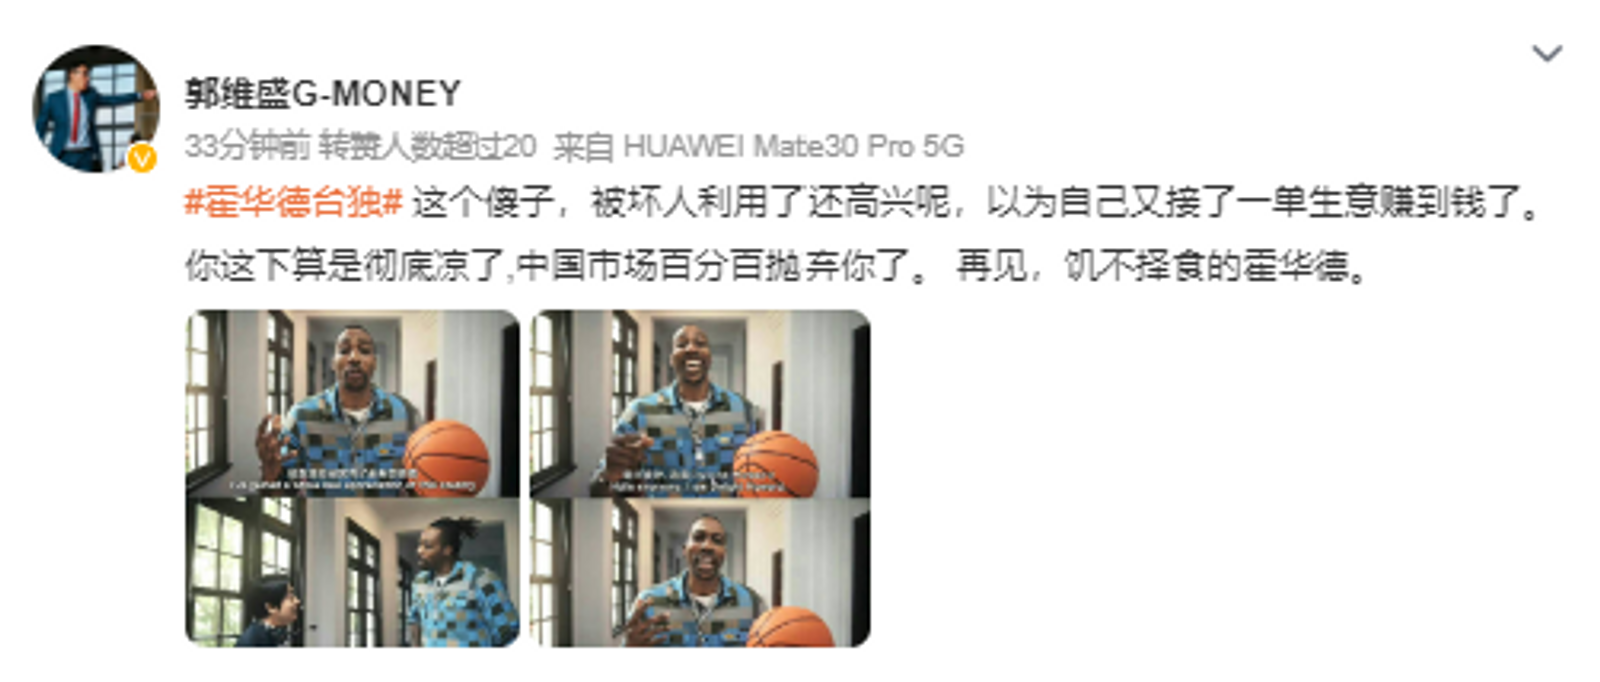 Weibo comment on Dwight Howard